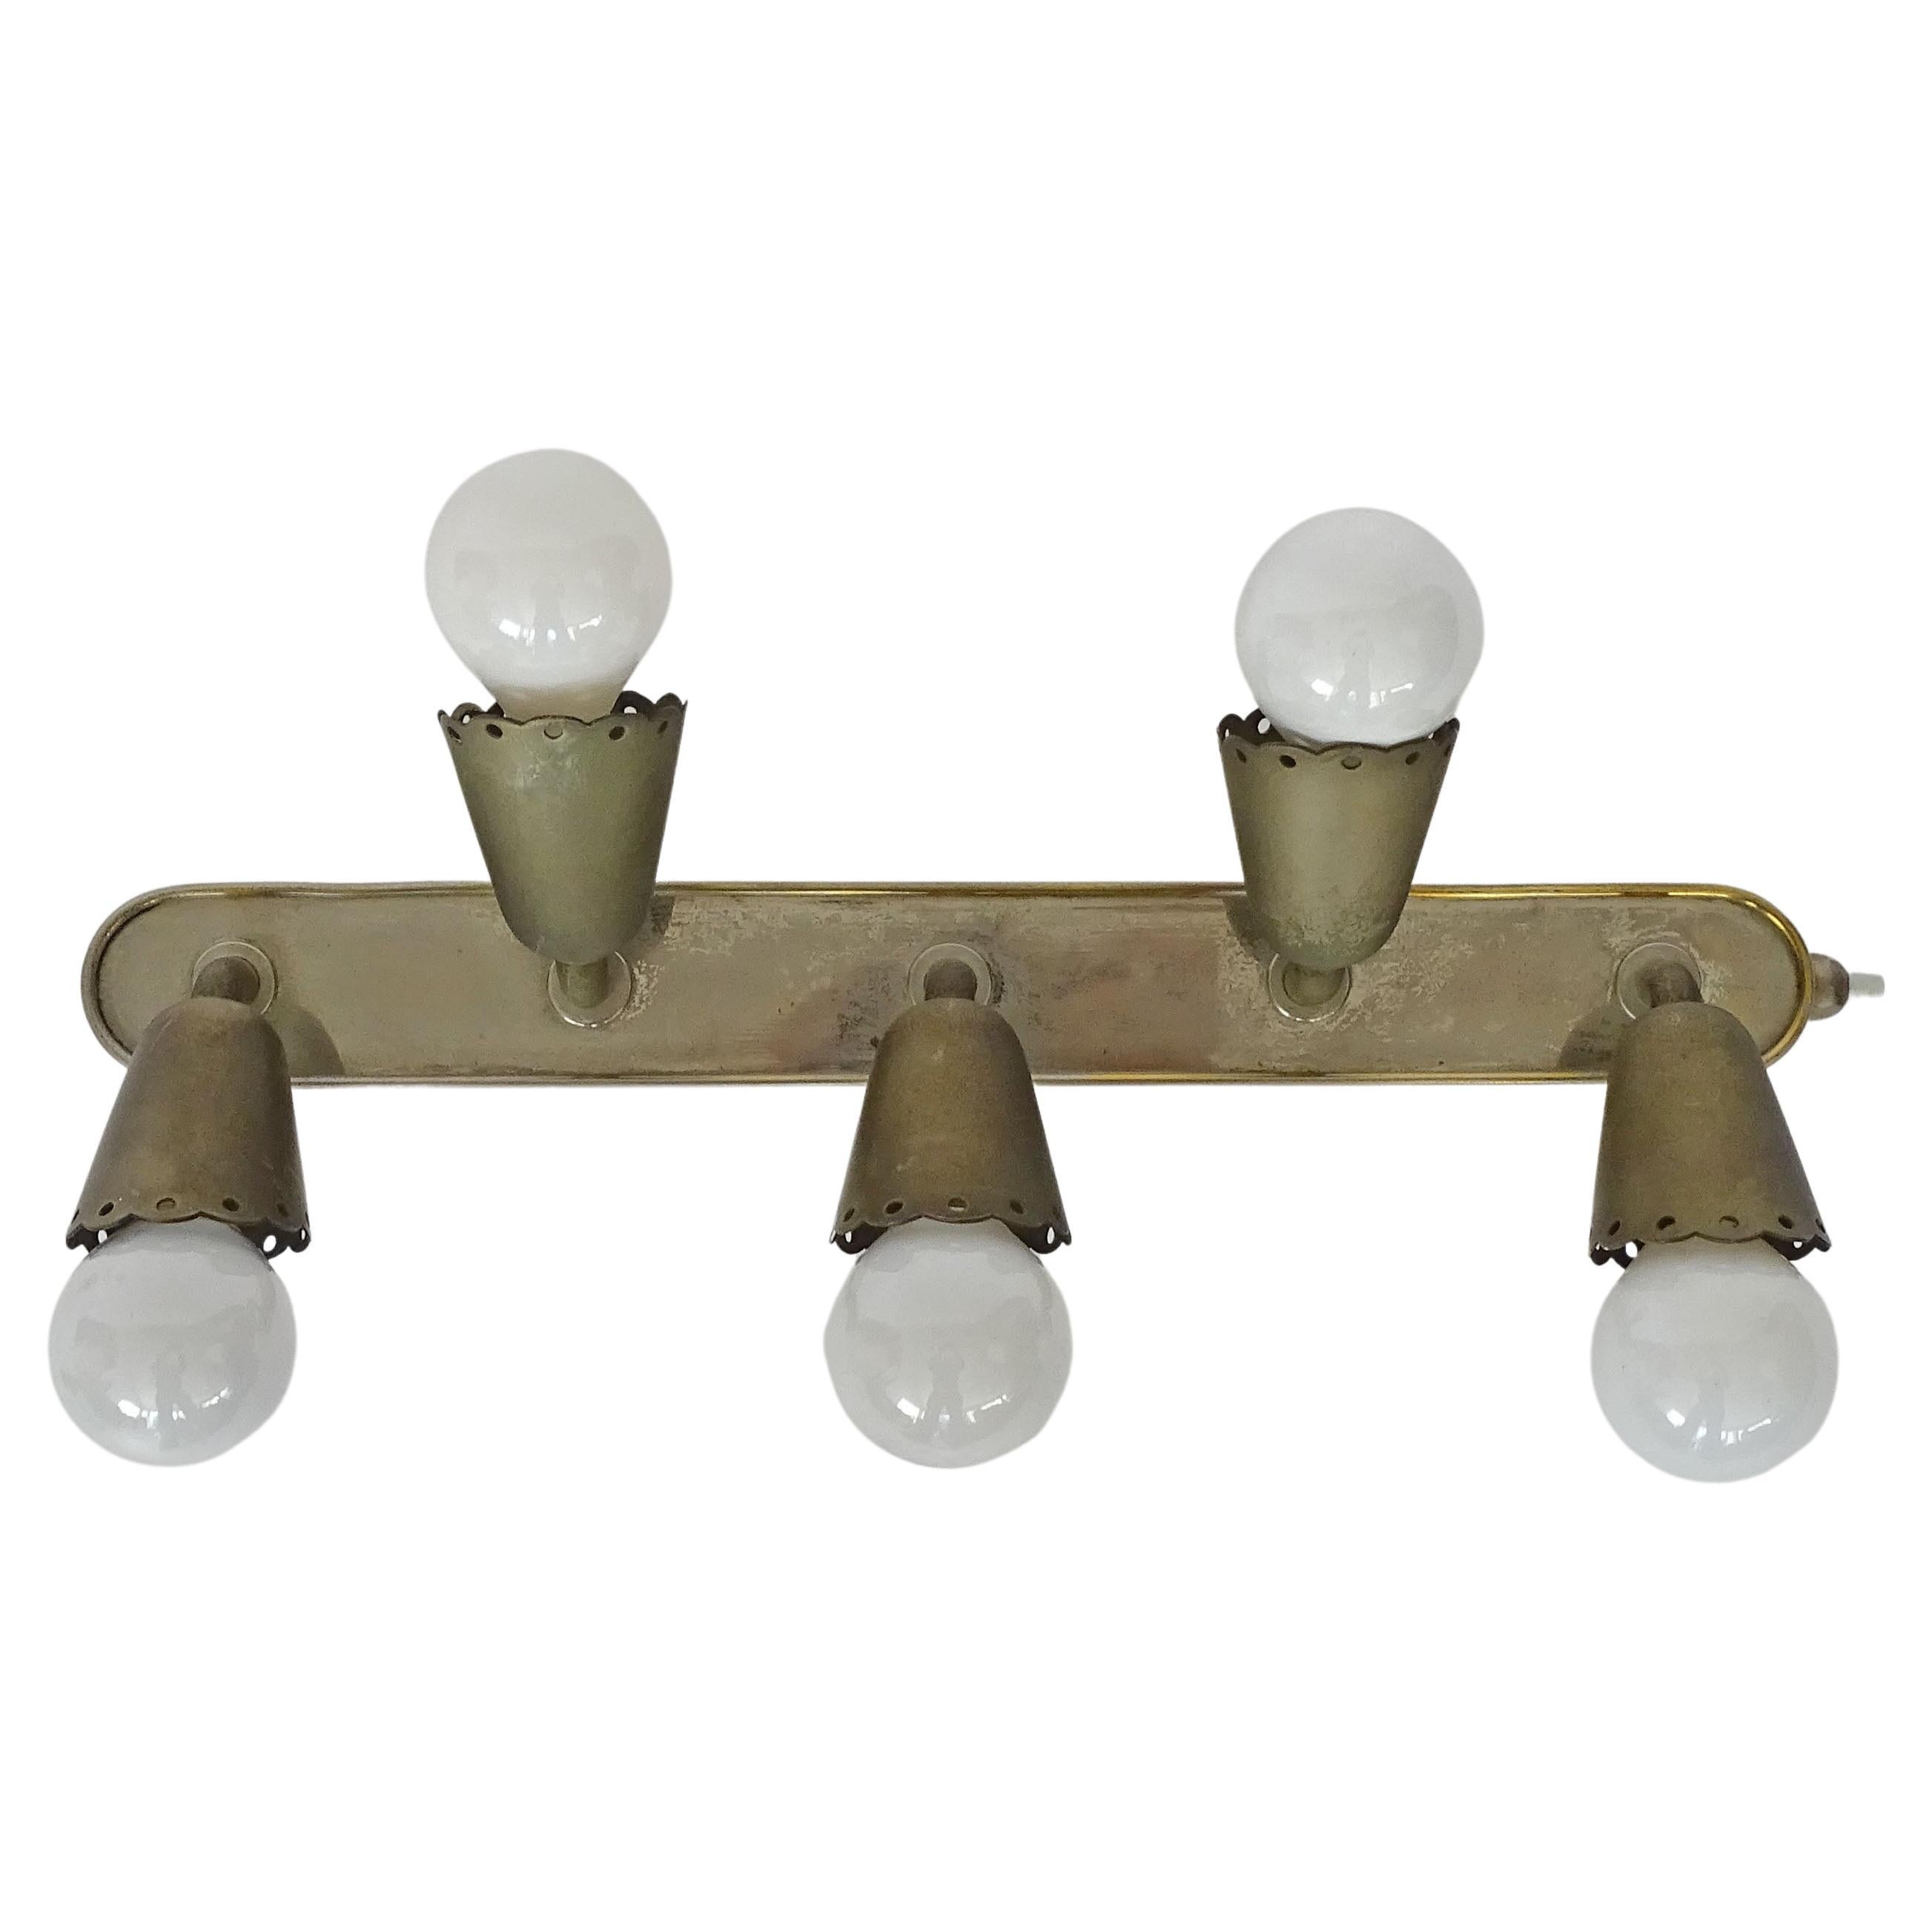 Italian 1930s five-light wall lamp in nickel brass attributed to Fontana Arte. For Sale